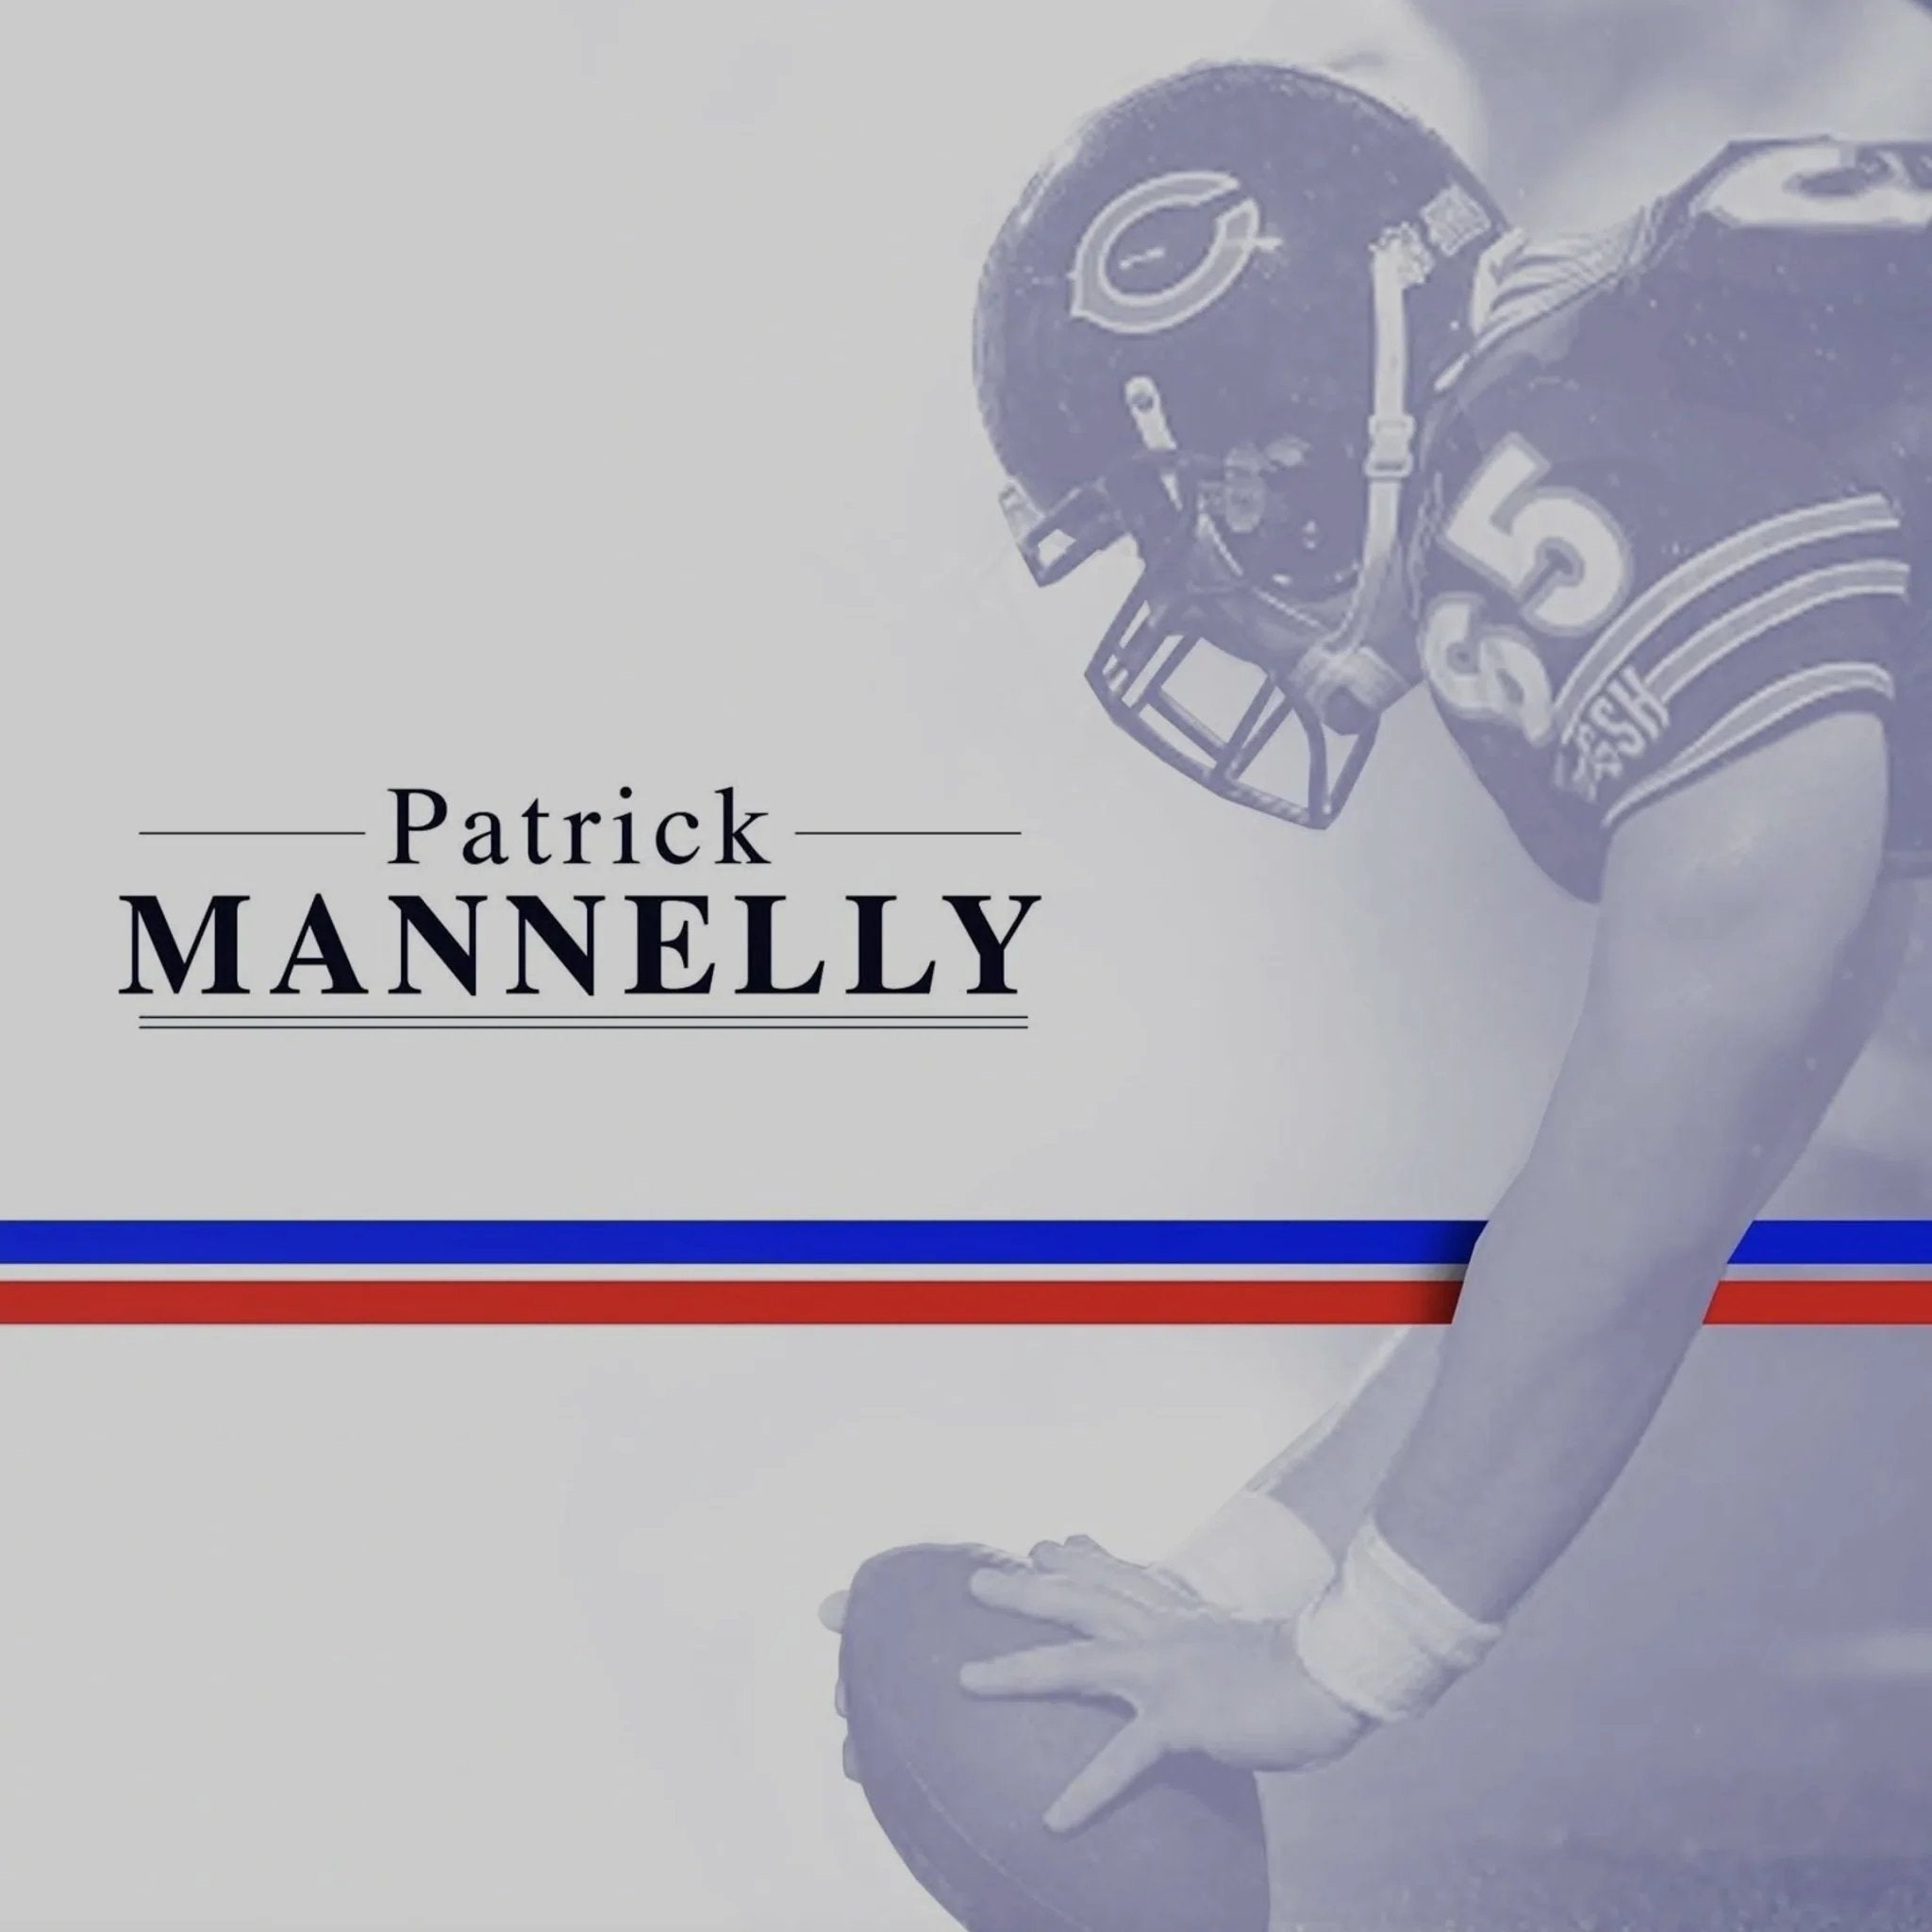 PATRICK MANNELLY AWARD. | OBVIOUS SHIRTS.